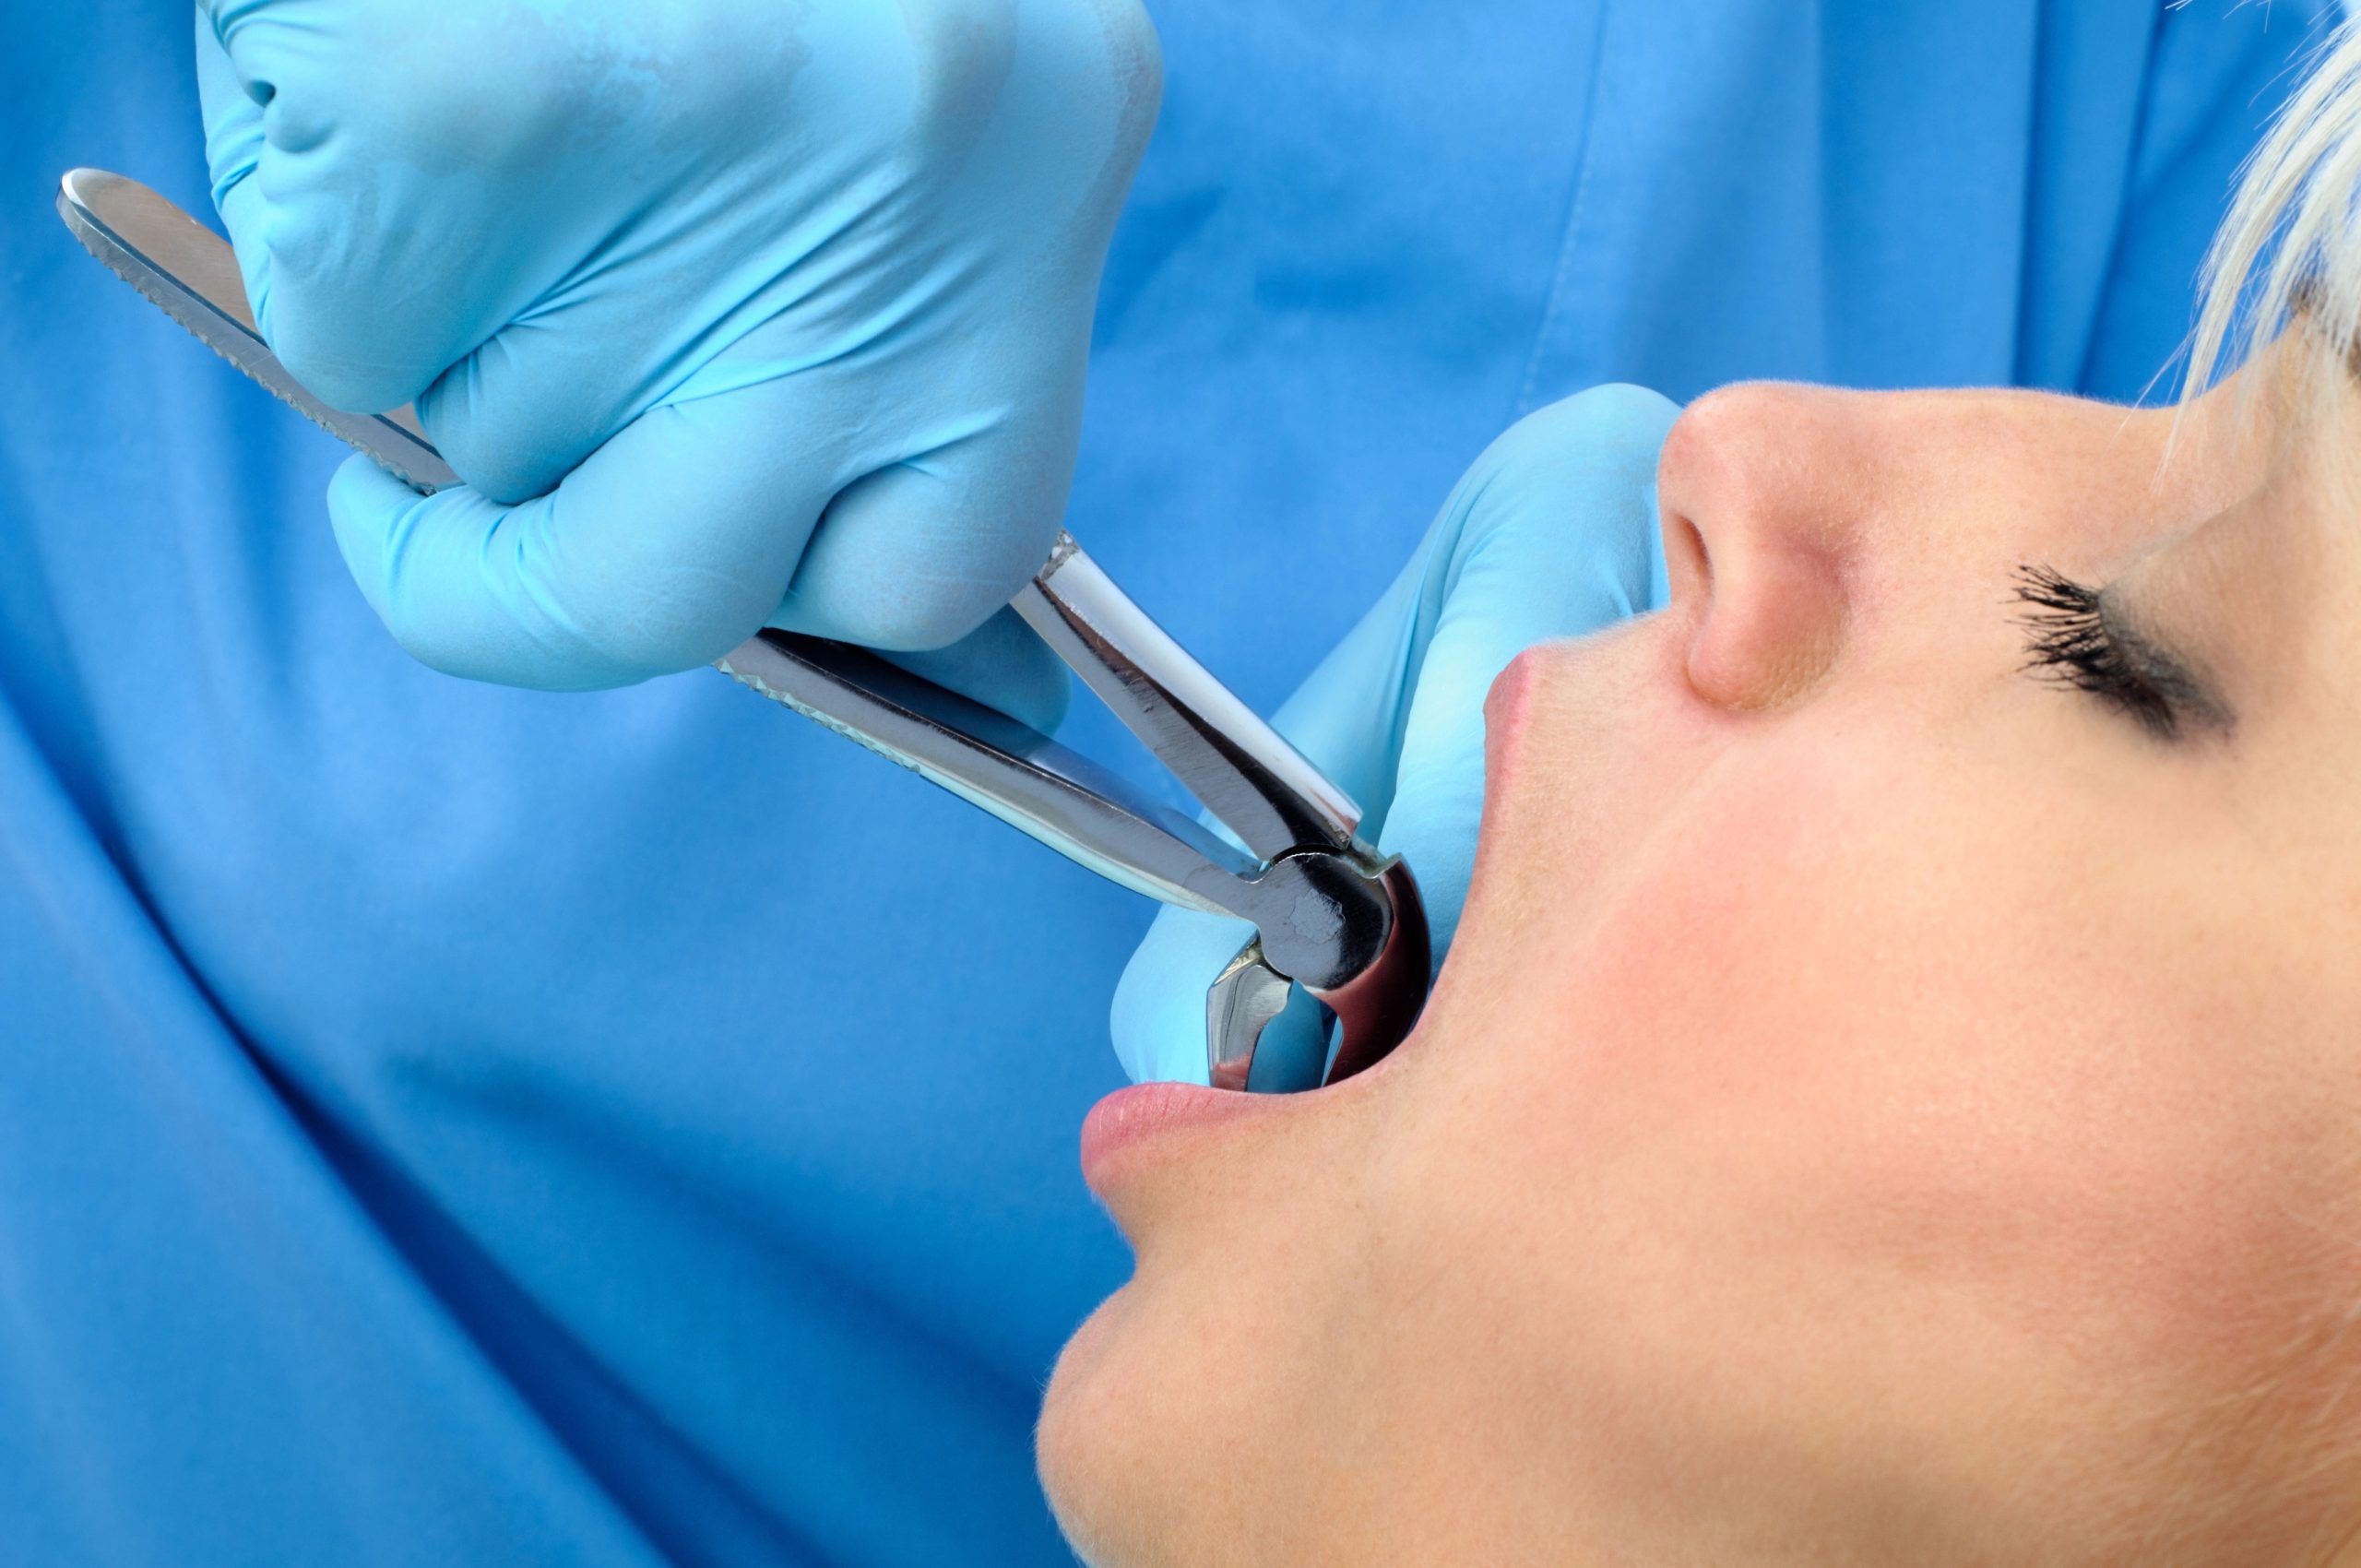 Tooth Extraction Procedure: Step-by-Step Guide